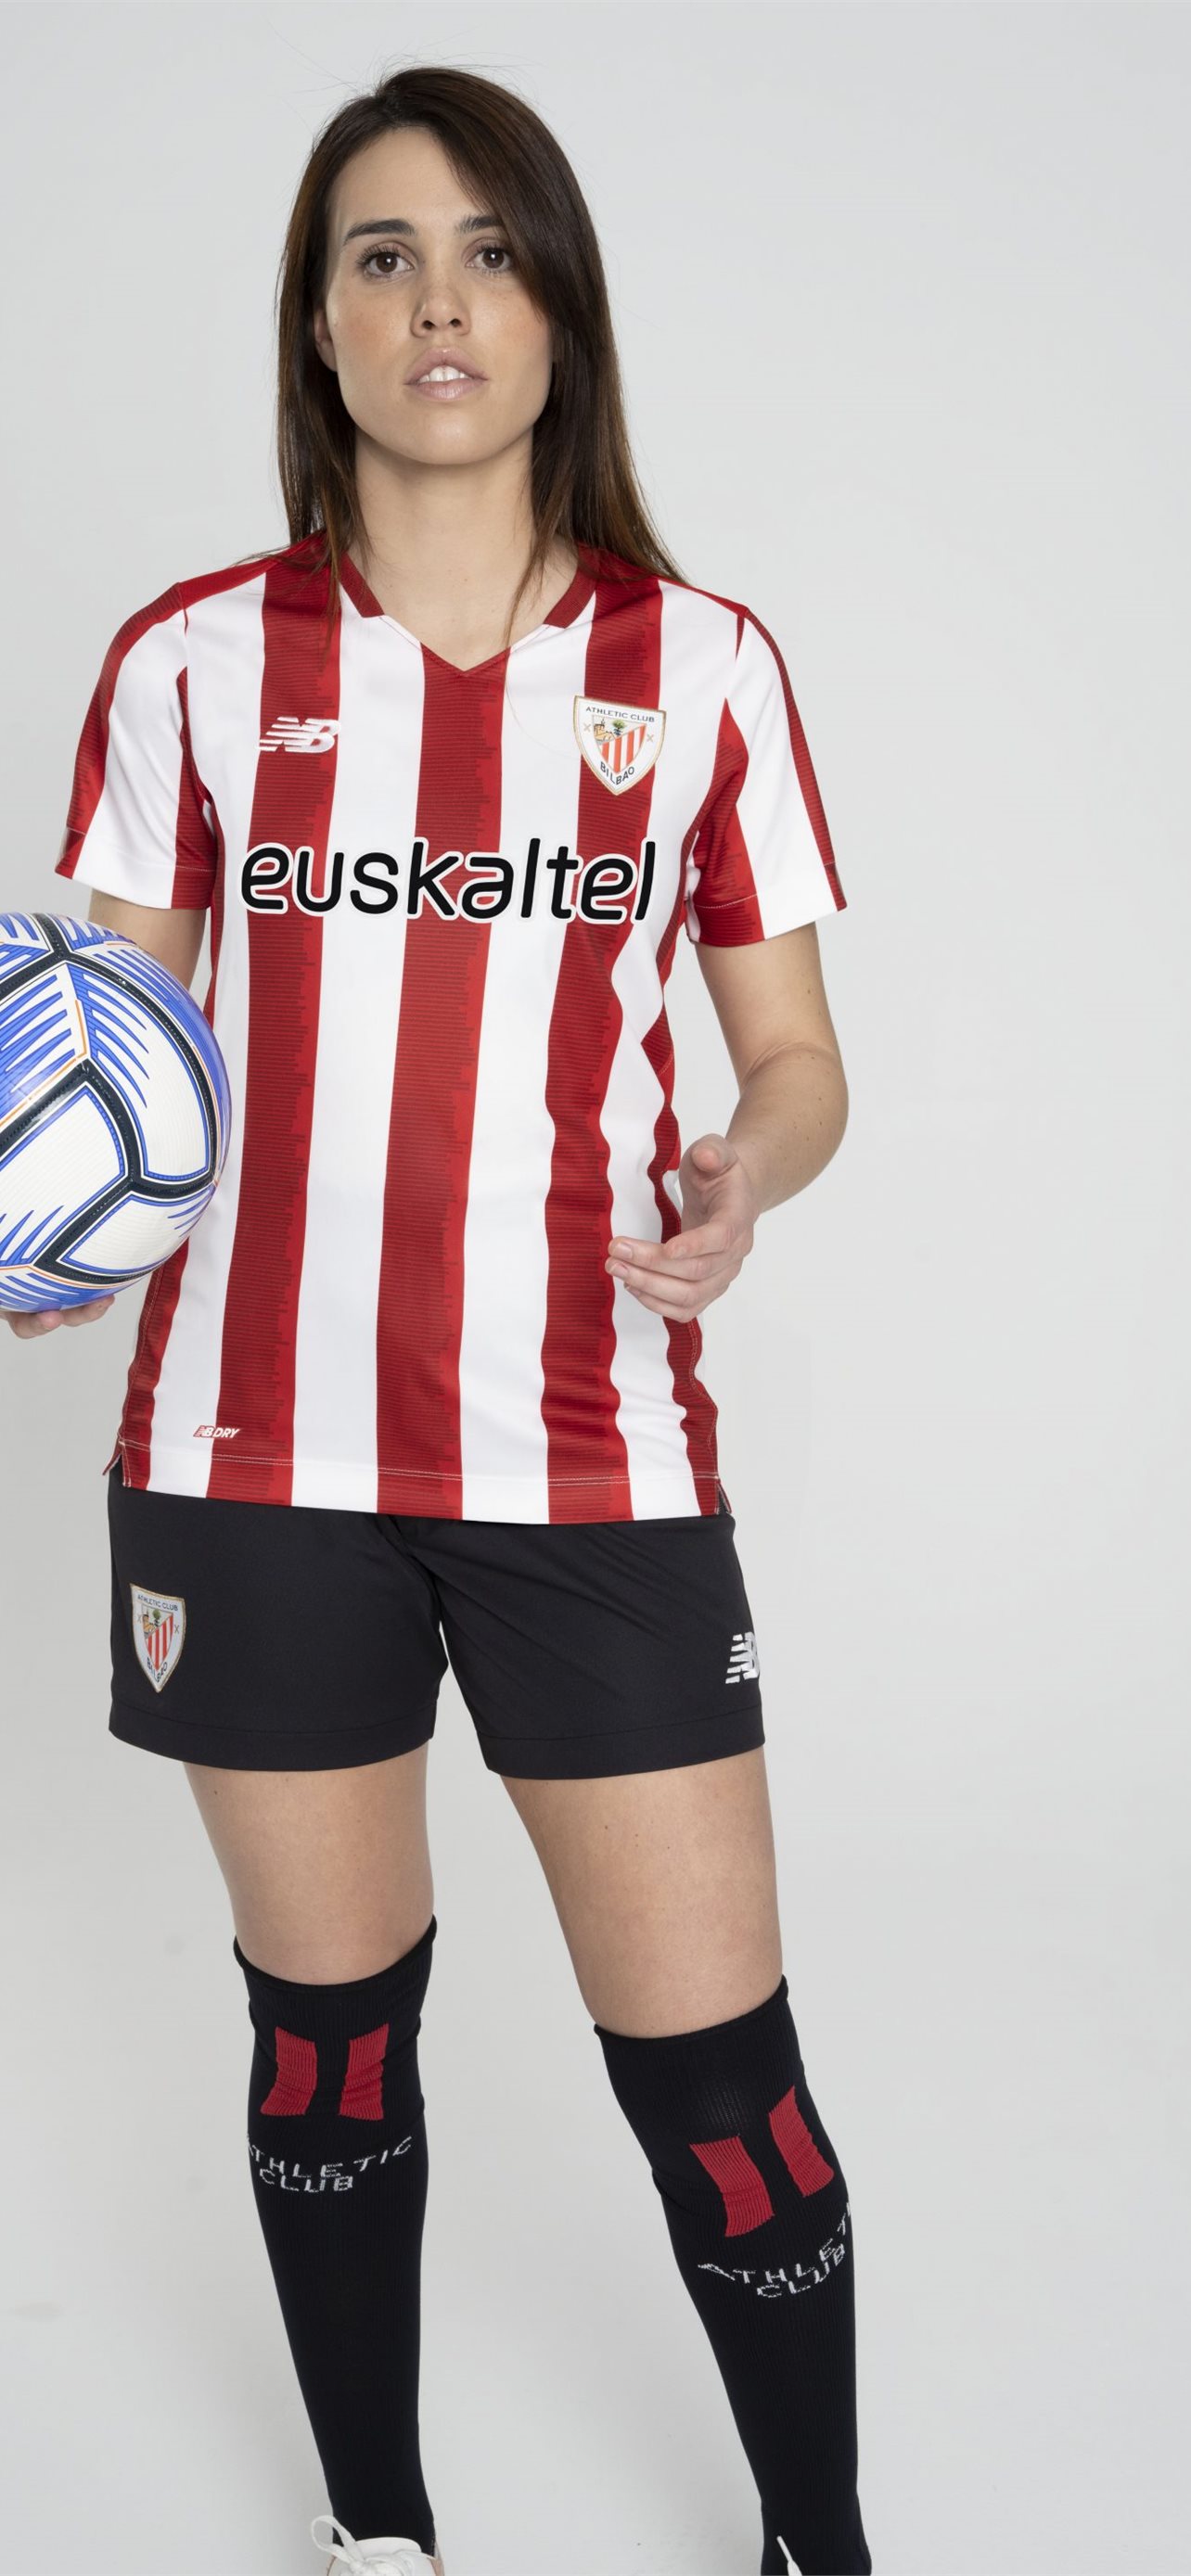 Athletic bilbao iphone wallpapers free download